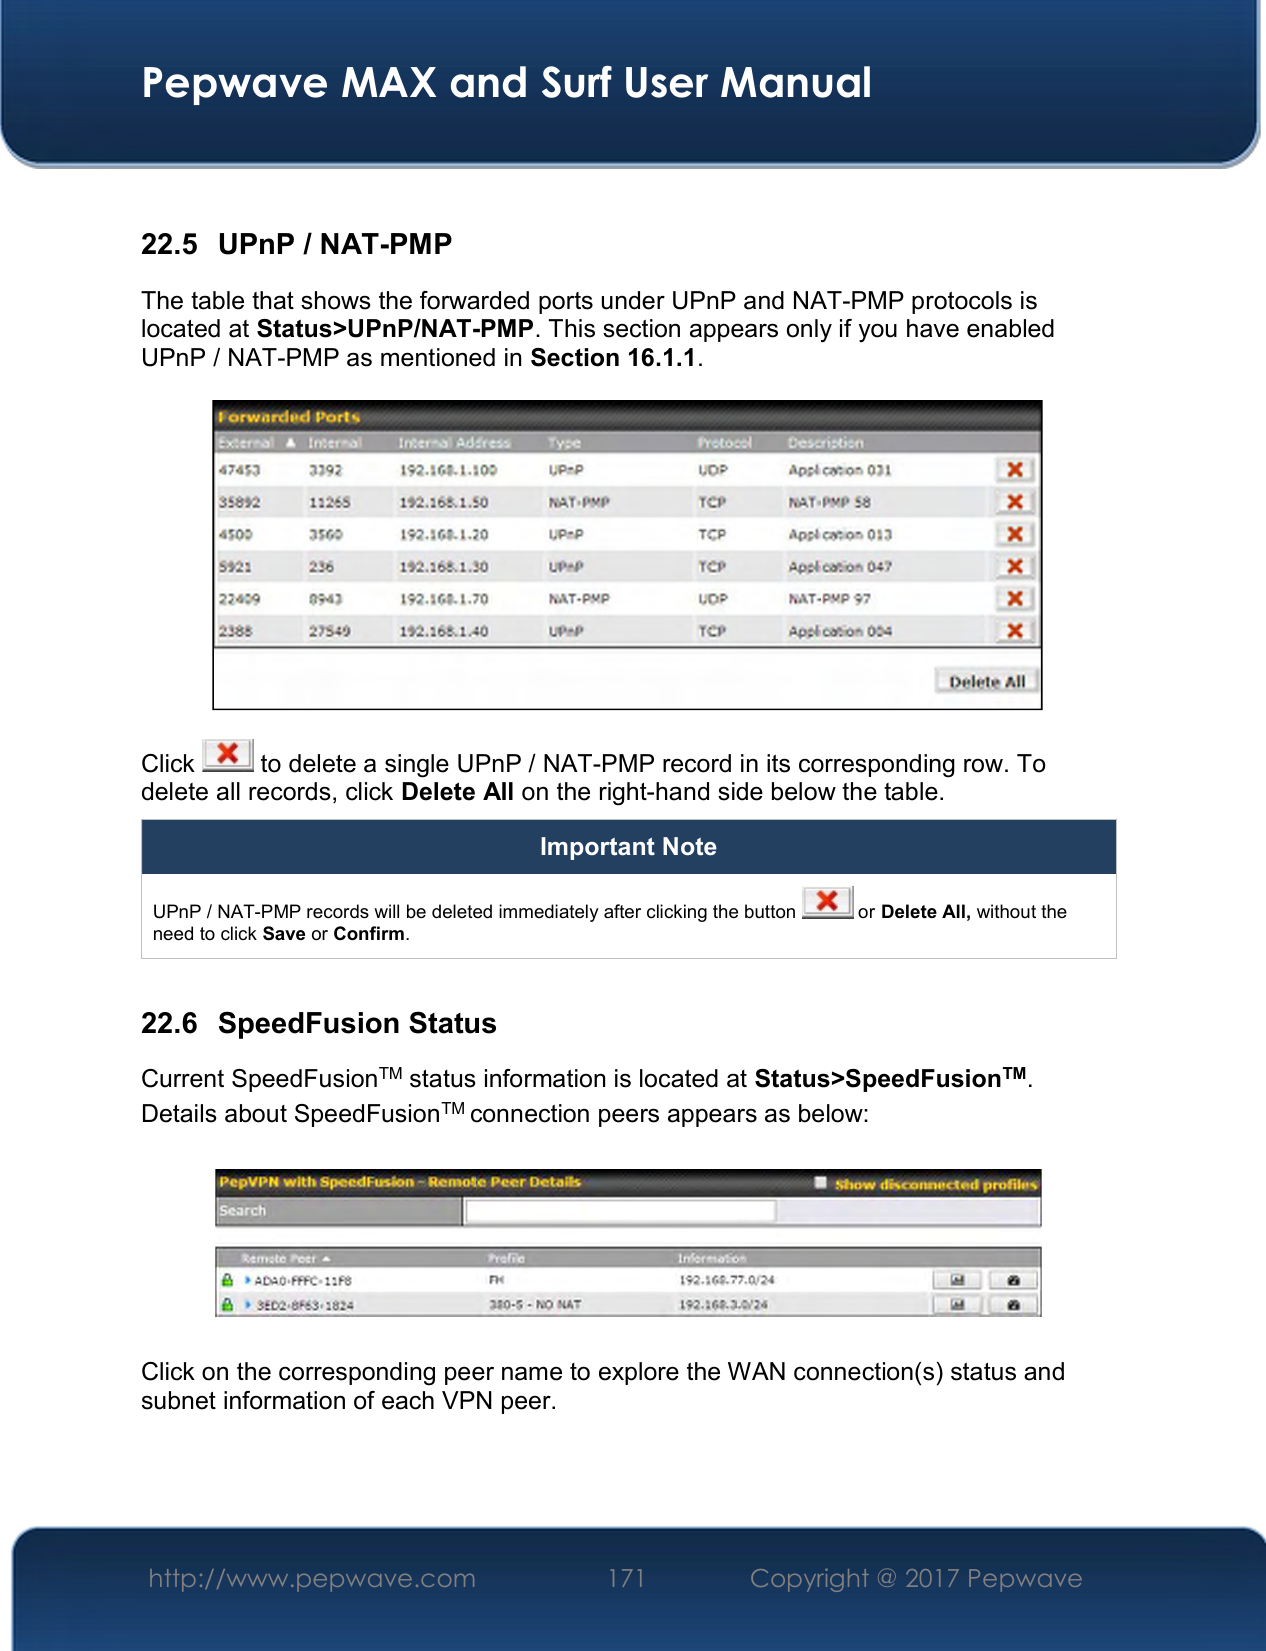  Pepwave MAX and Surf User Manual http://www.pepwave.com  171    Copyright @ 2017 Pepwave    22.5  UPnP / NAT-PMP The table that shows the forwarded ports under UPnP and NAT-PMP protocols is located at Status&gt;UPnP/NAT-PMP. This section appears only if you have enabled UPnP / NAT-PMP as mentioned in Section 16.1.1.  Click   to delete a single UPnP / NAT-PMP record in its corresponding row. To delete all records, click Delete All on the right-hand side below the table. Important Note UPnP / NAT-PMP records will be deleted immediately after clicking the button   or Delete All, without the need to click Save or Confirm.  22.6  SpeedFusion Status Current SpeedFusionTM status information is located at Status&gt;SpeedFusionTM. Details about SpeedFusionTM connection peers appears as below:    Click on the corresponding peer name to explore the WAN connection(s) status and subnet information of each VPN peer. 